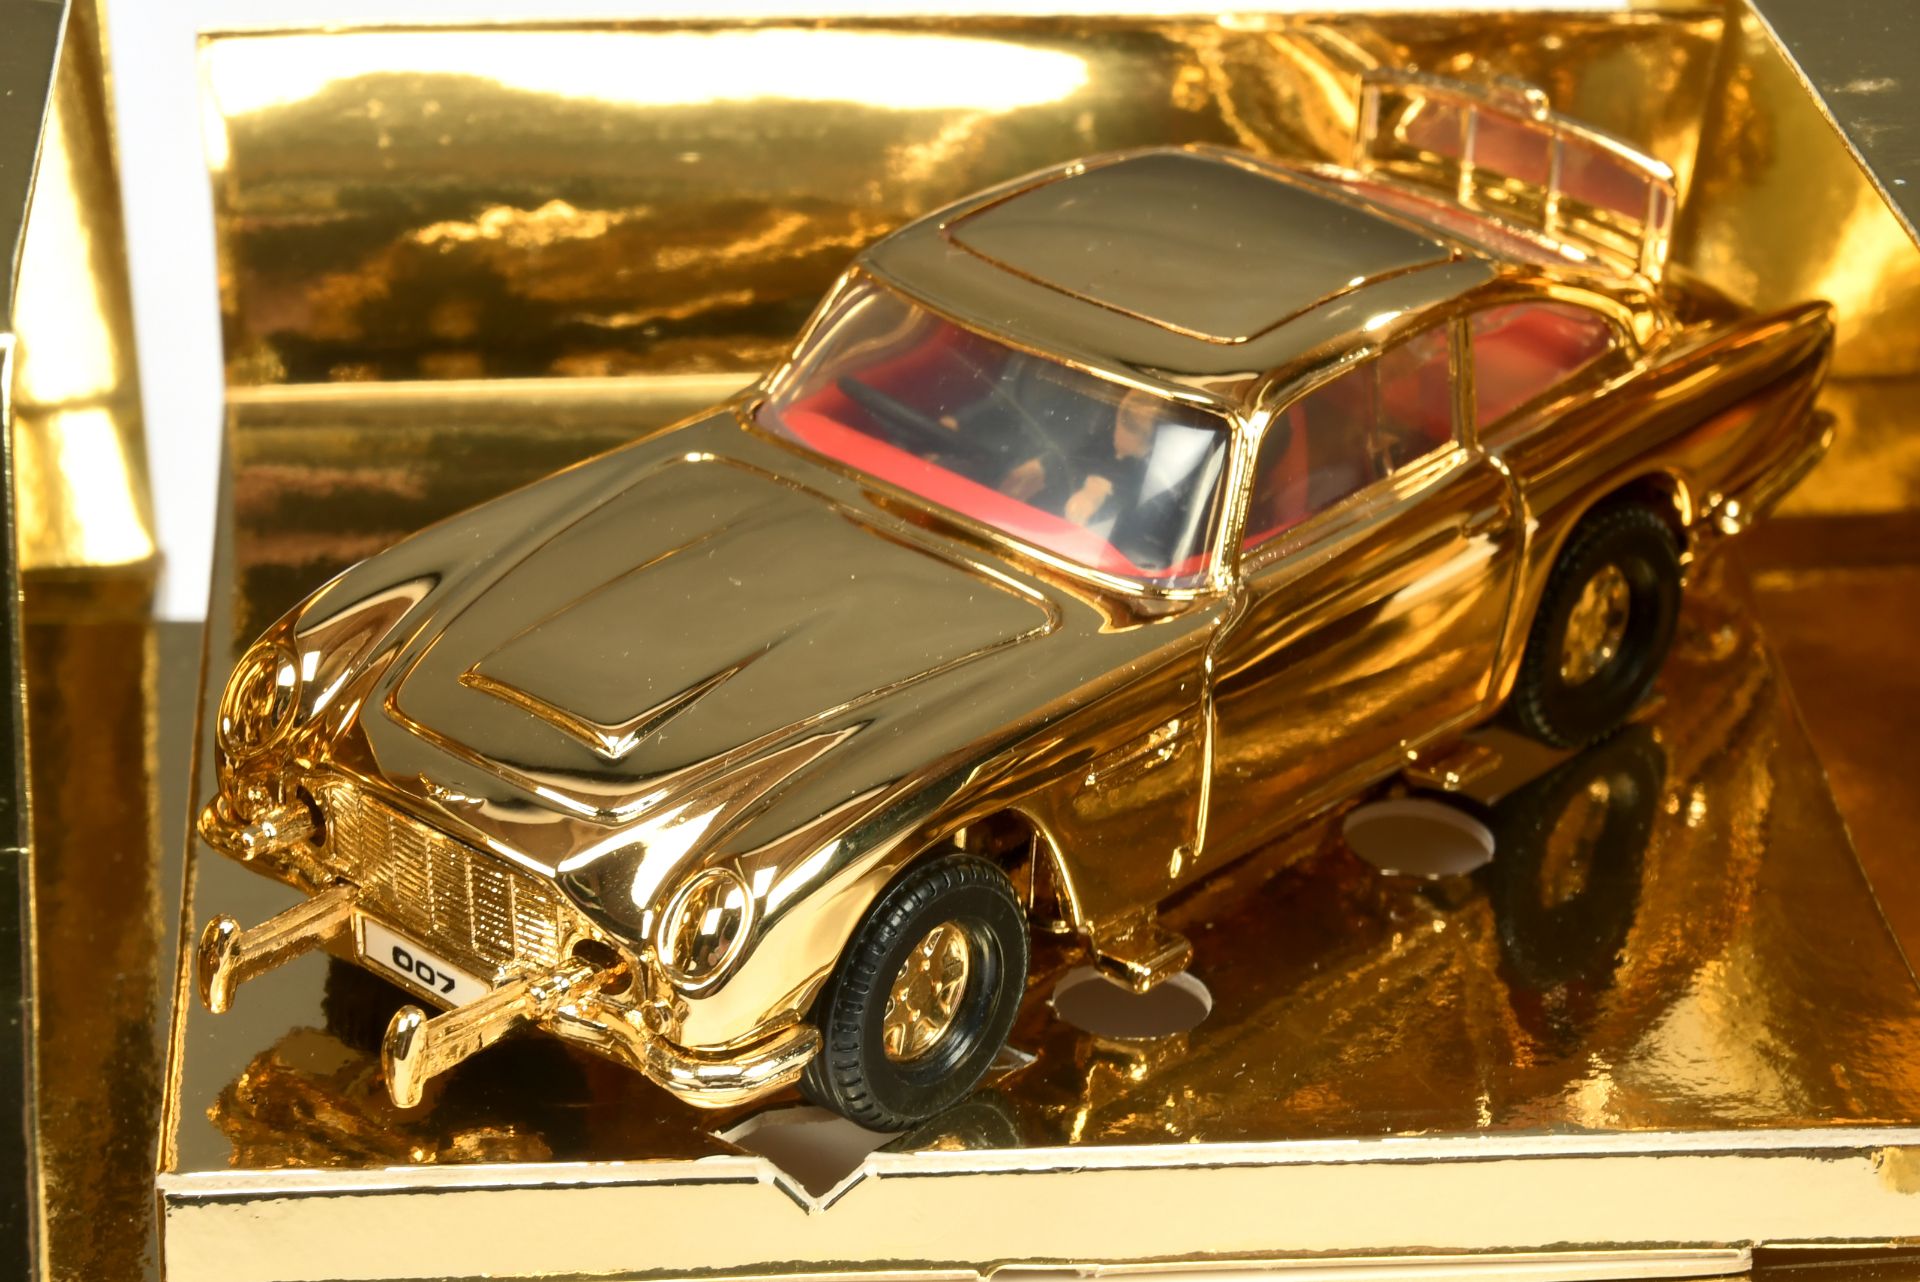 Corgi Toys "James Bond" Aston martin (1/36th scale) - Gold Plated issue with red interior and "Ja... - Bild 7 aus 8